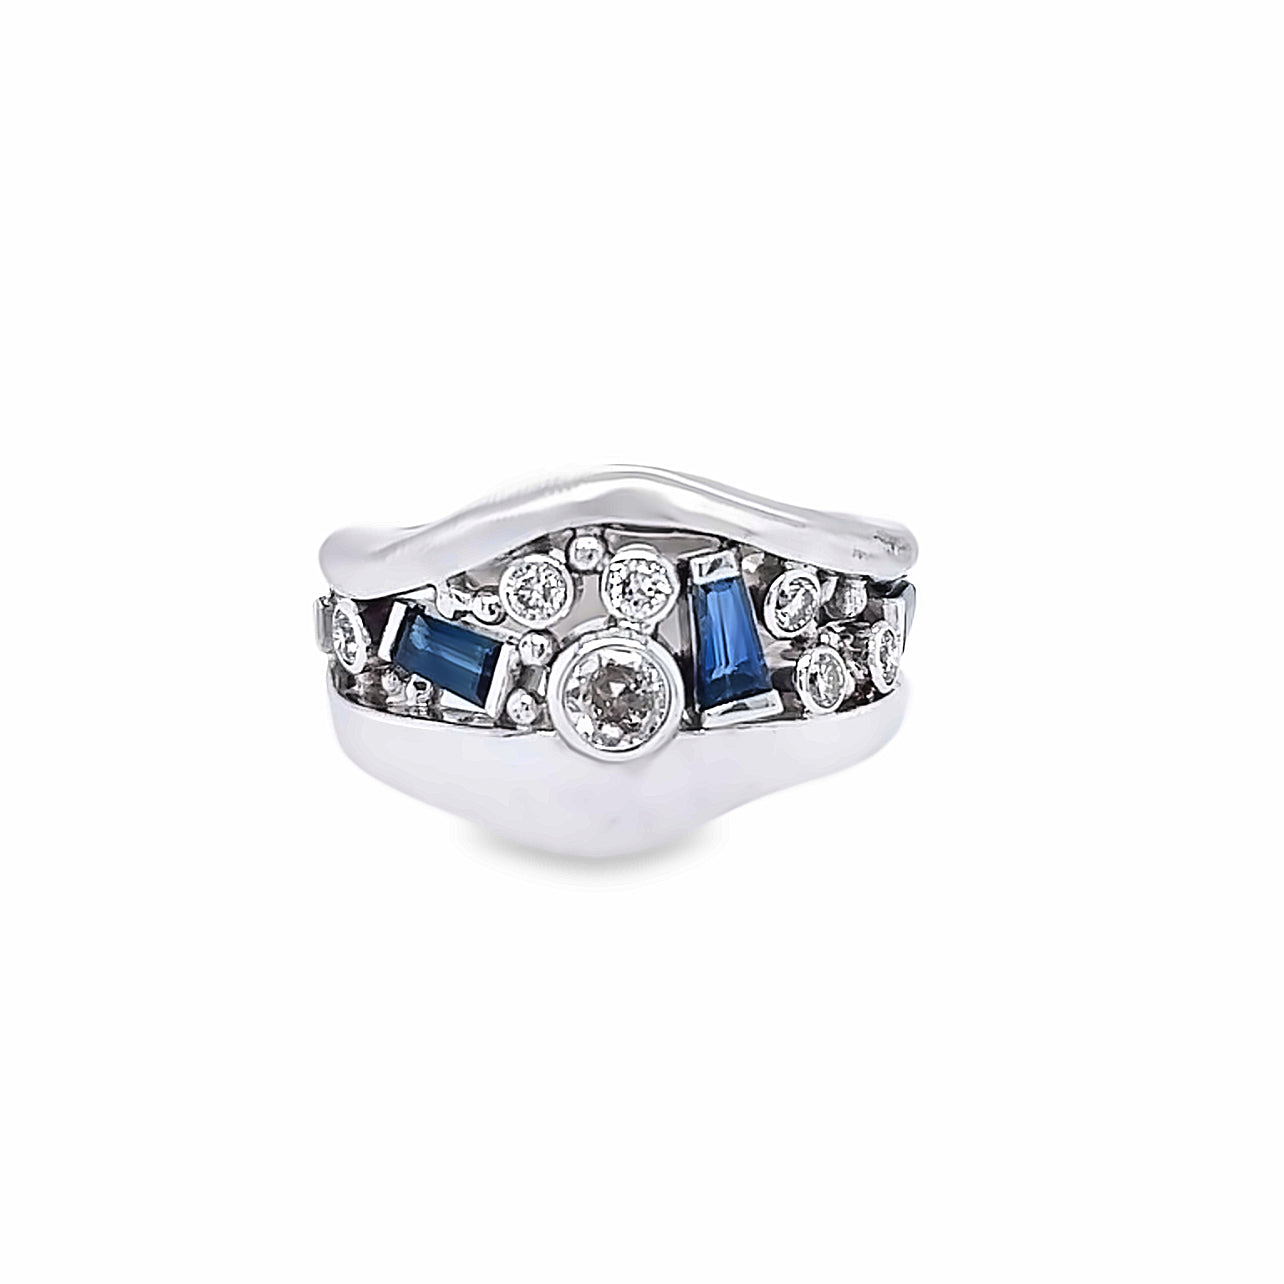 Custom 14k White Gold Round Diamond and Sapphire River Ring by Paul Richter